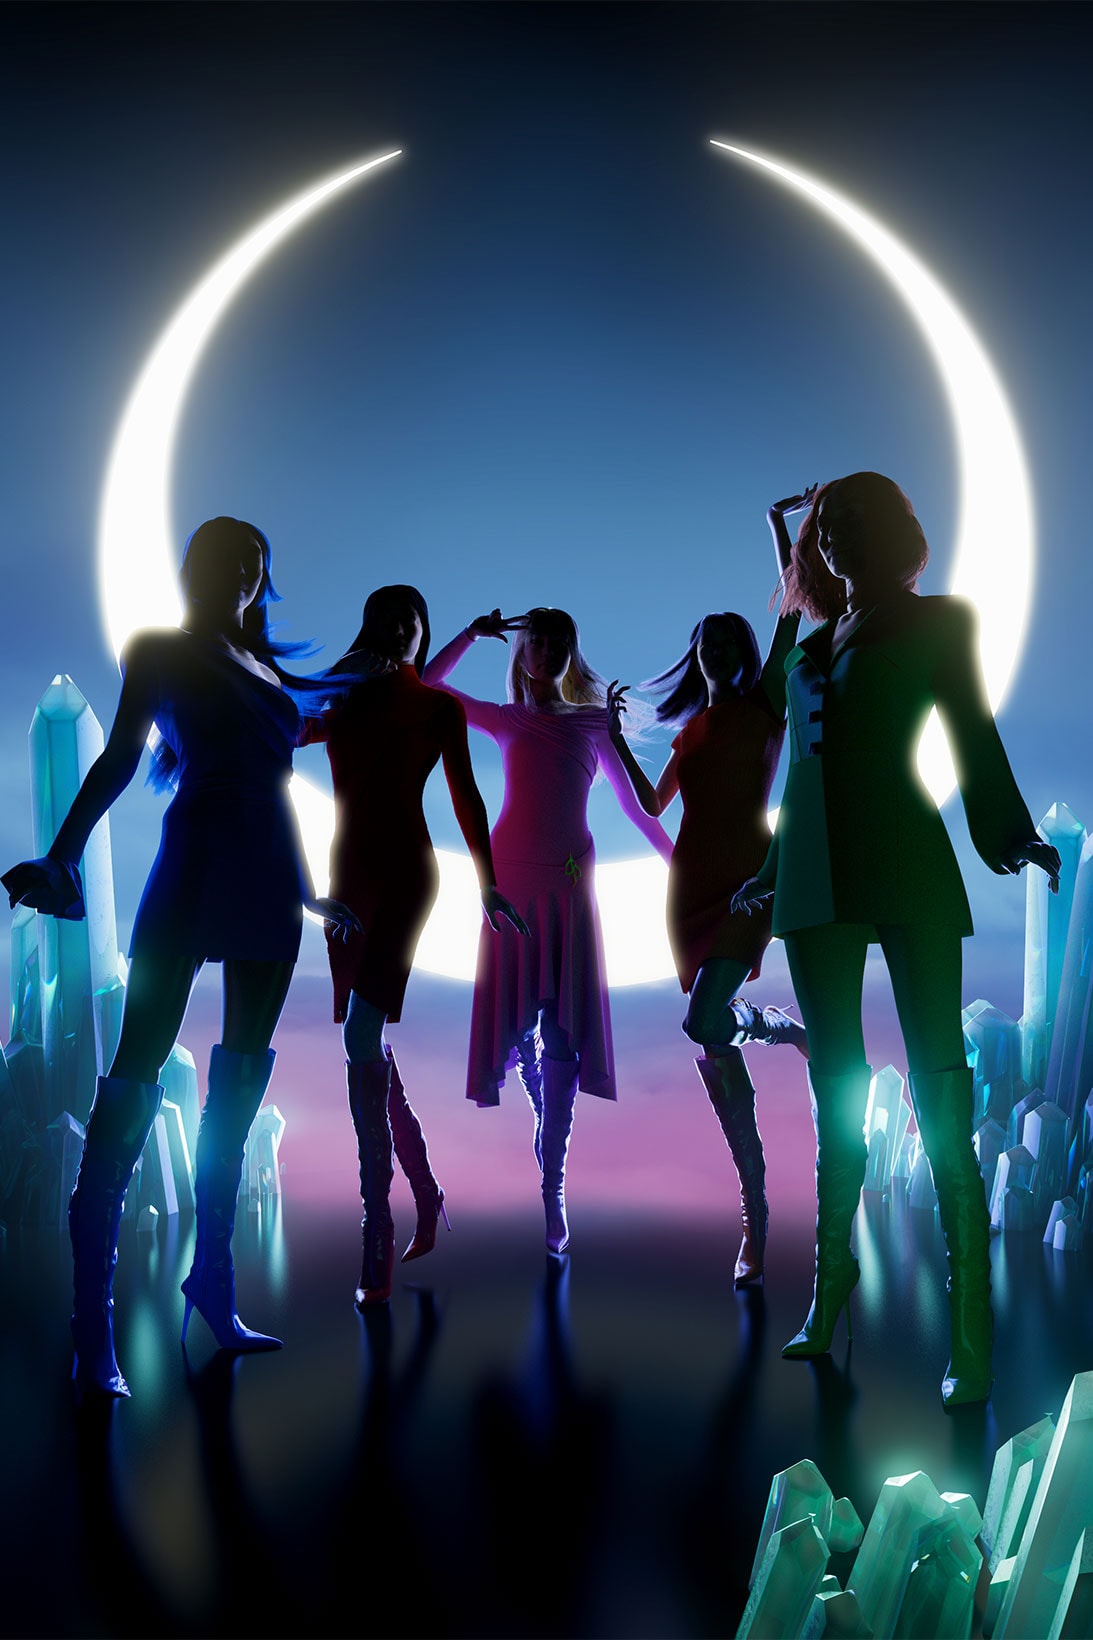 SG5, J-Pop Group Debuting in Collab With Sailor Moon